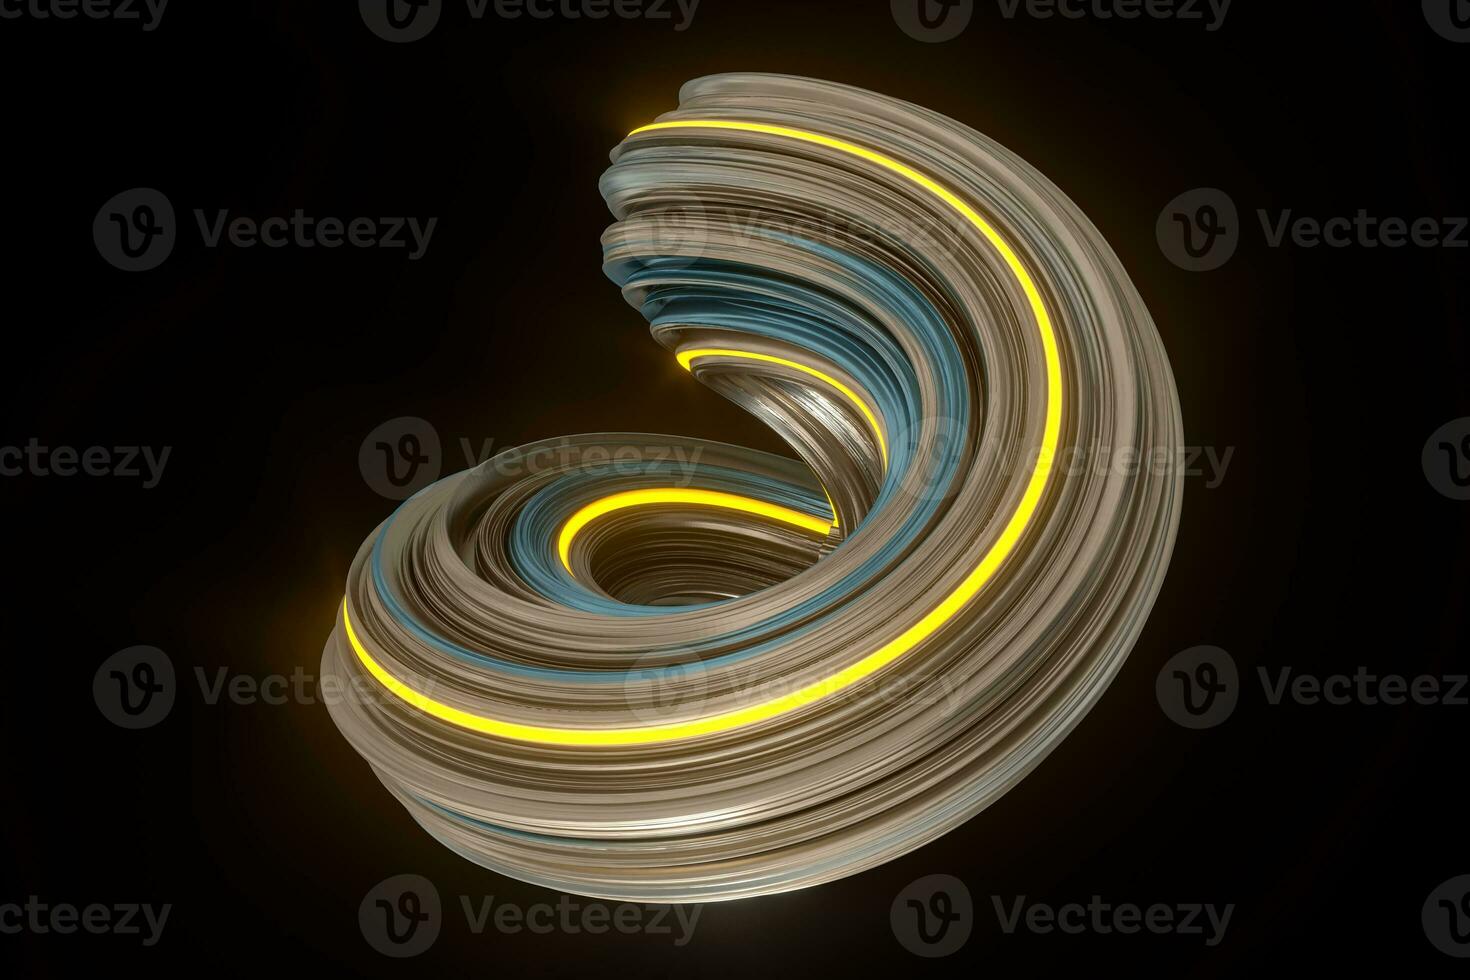 Colorful round geometry, gradient curve background, 3d rendering. photo